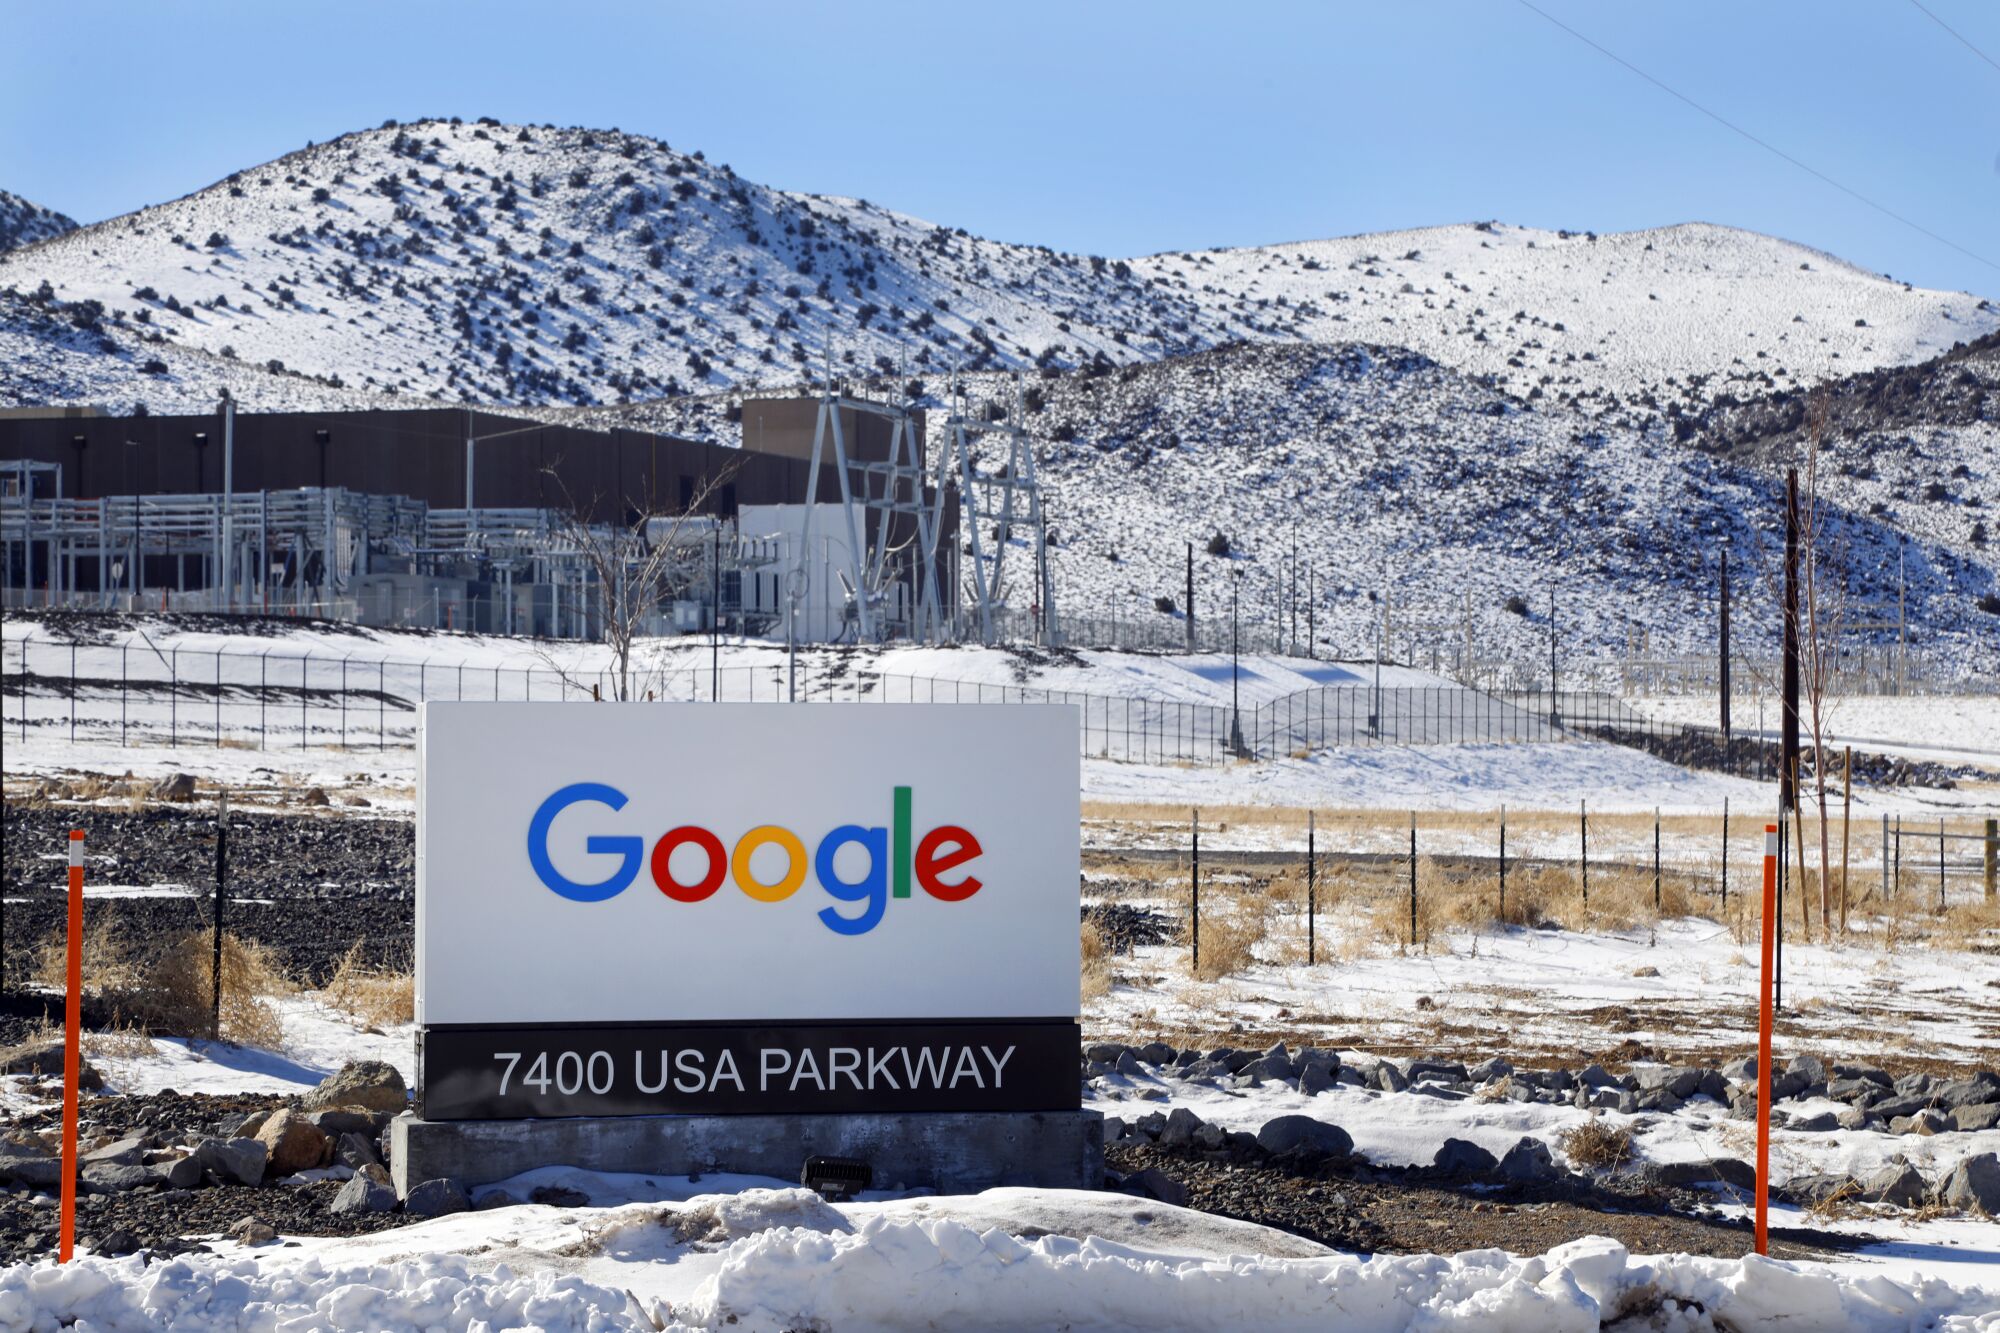 A Google sign in front of snowy mountains.